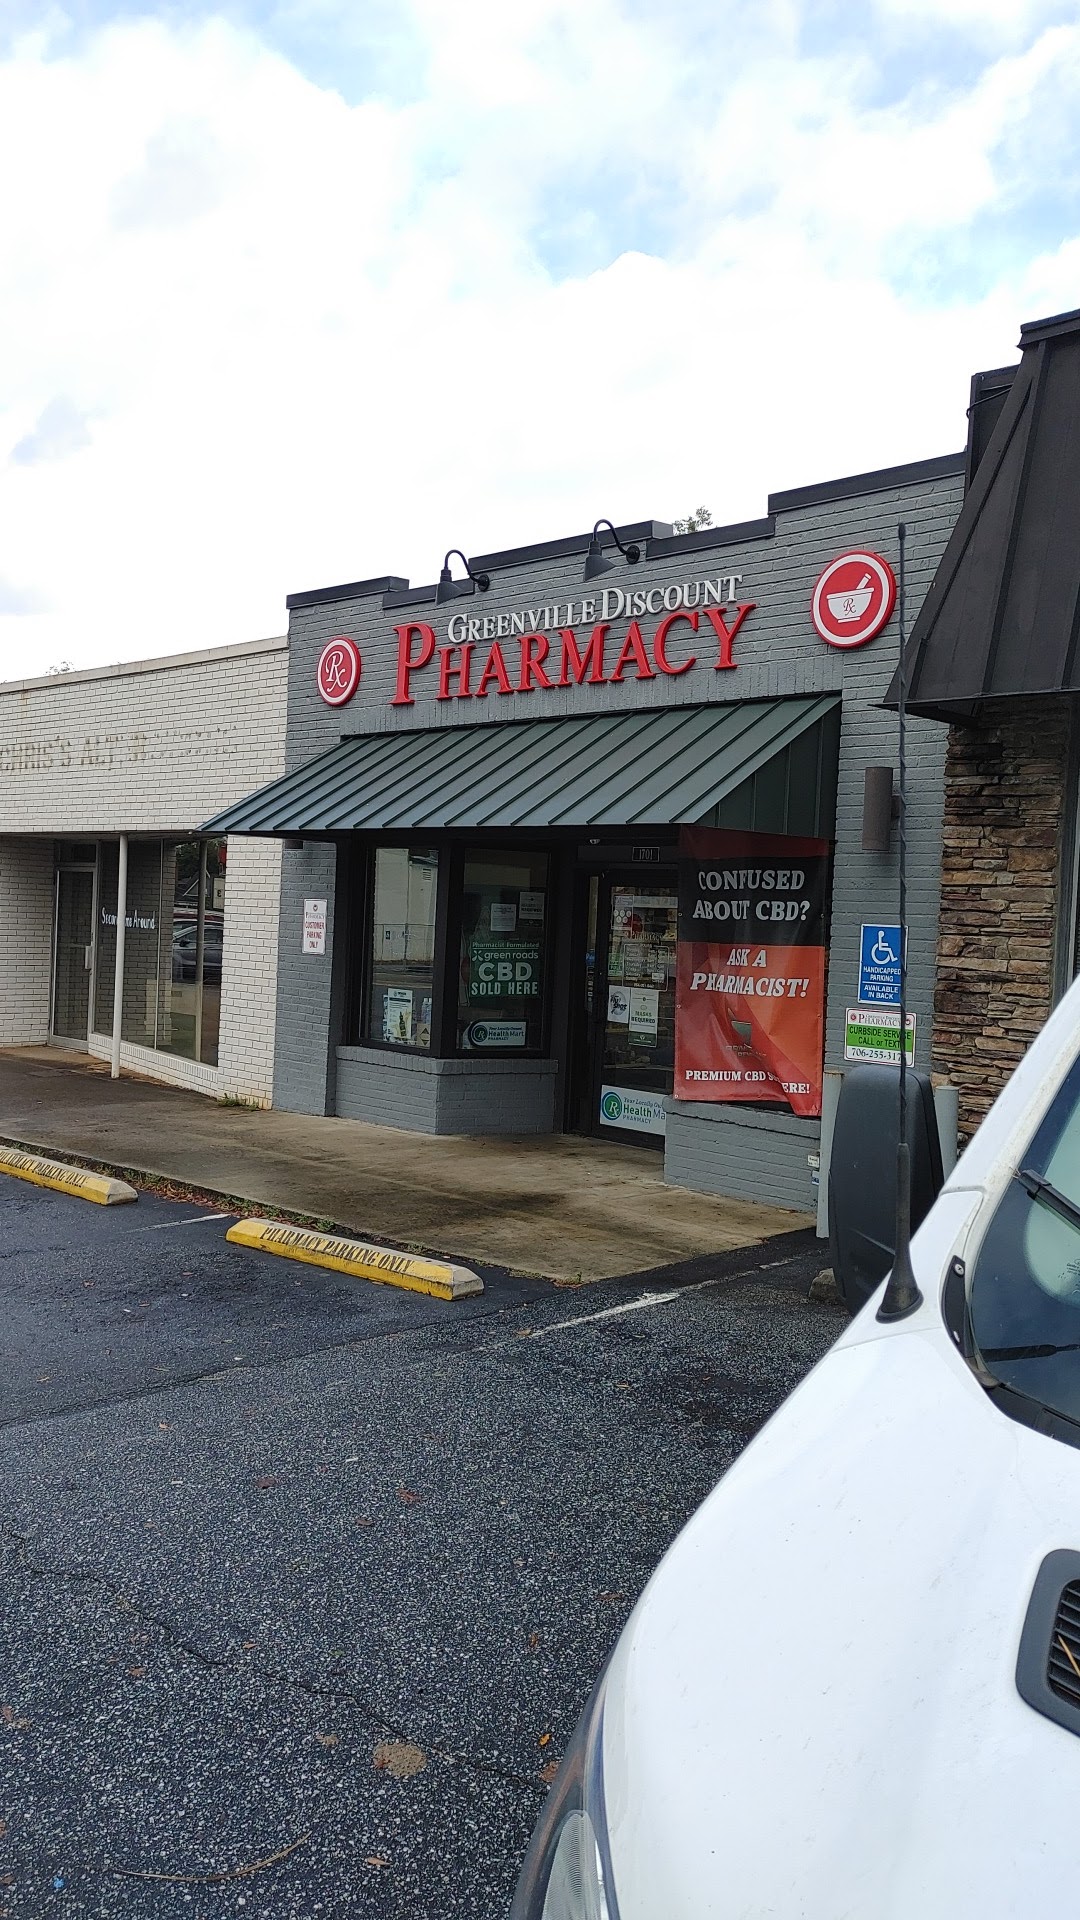 Greenville Discount Pharmacy